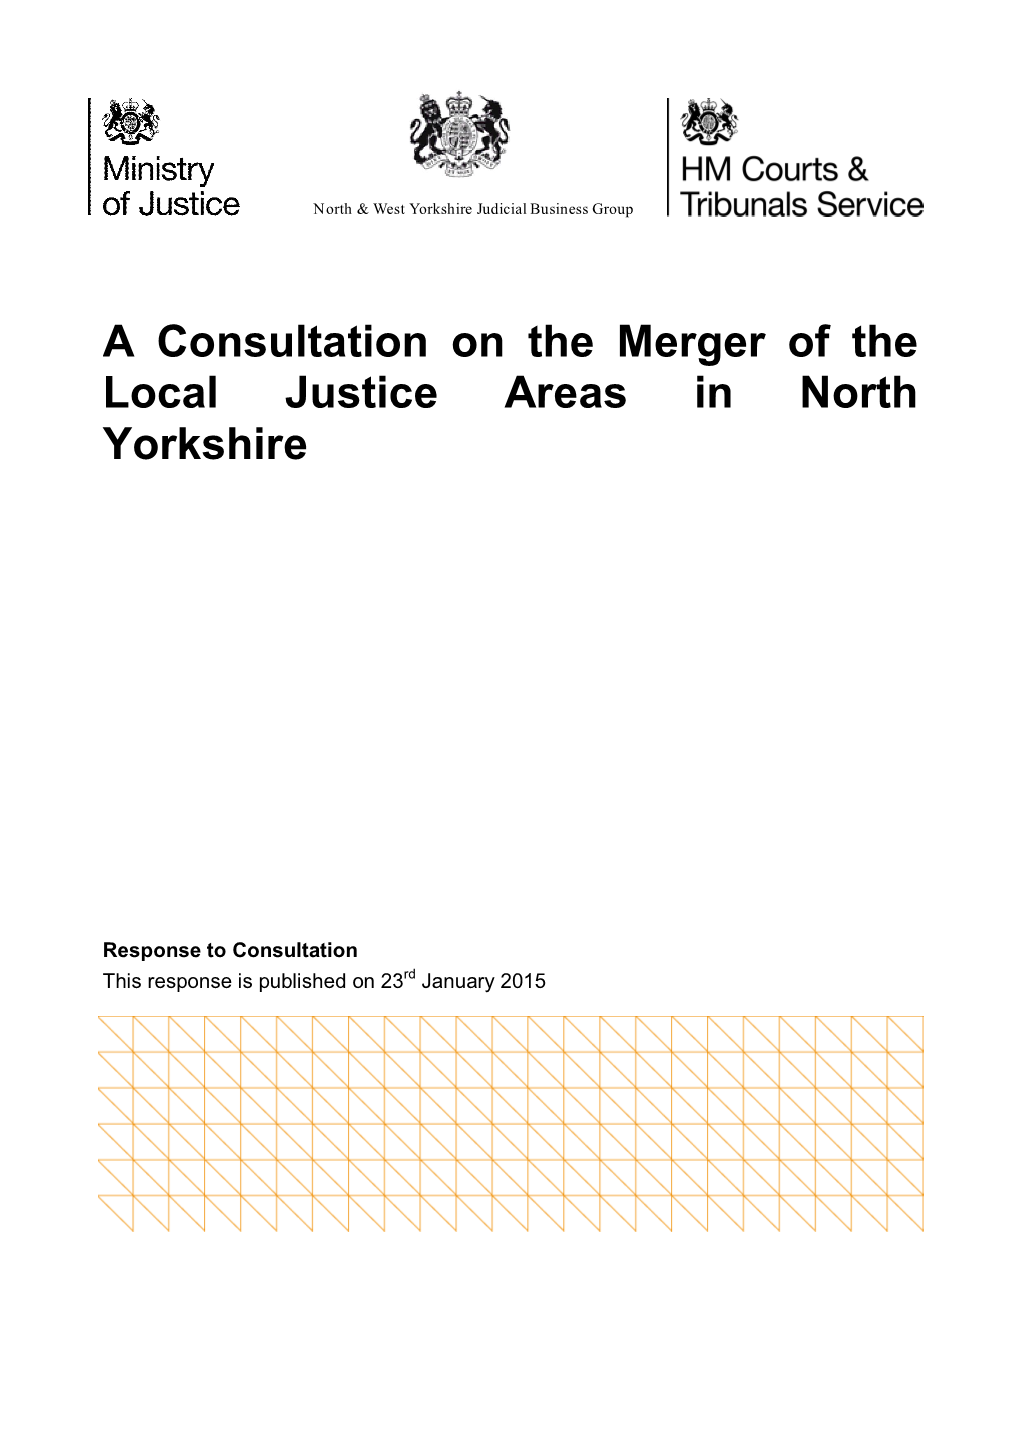 A Consultation on the Merger of the Local Justice Areas in North Yorkshire